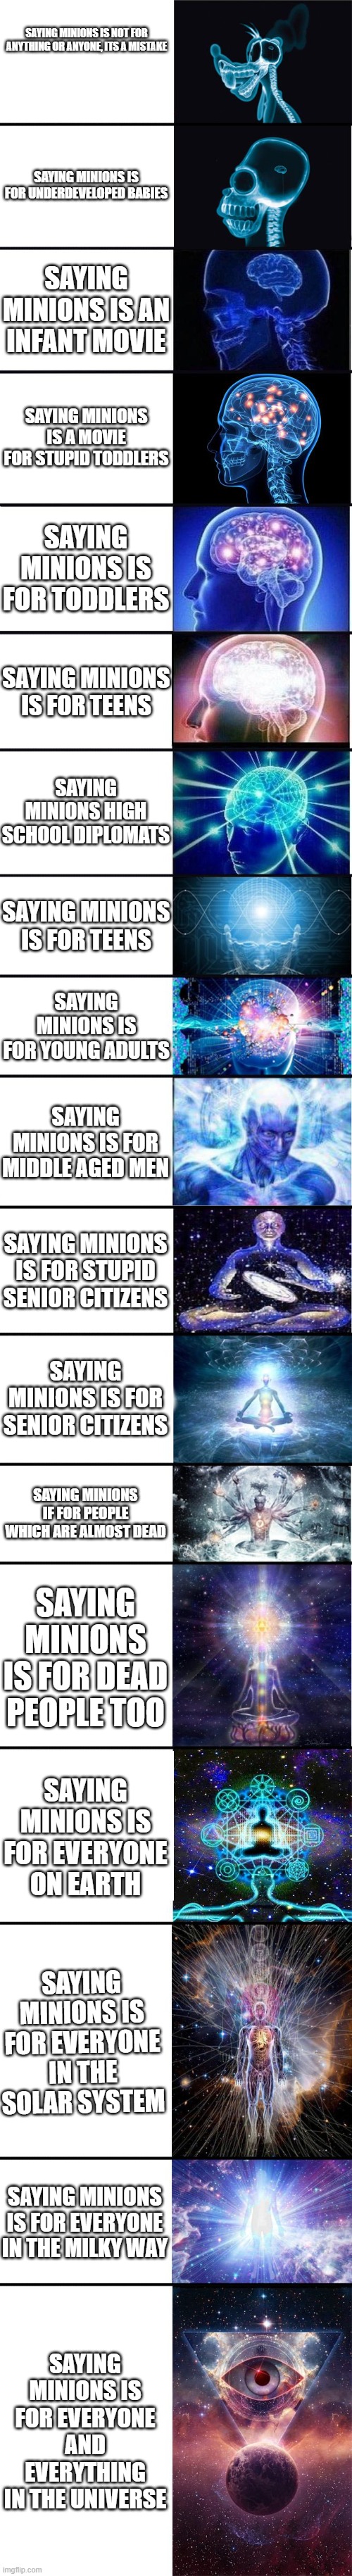 I made another sequel on this account, what is wrong with me? | SAYING MINIONS IS NOT FOR ANYTHING OR ANYONE, ITS A MISTAKE; SAYING MINIONS IS FOR UNDERDEVELOPED BABIES; SAYING MINIONS IS AN INFANT MOVIE; SAYING MINIONS IS A MOVIE FOR STUPID TODDLERS; SAYING MINIONS IS FOR TODDLERS; SAYING MINIONS IS FOR TEENS; SAYING MINIONS HIGH SCHOOL DIPLOMATS; SAYING MINIONS IS FOR TEENS; SAYING MINIONS IS FOR YOUNG ADULTS; SAYING MINIONS IS FOR MIDDLE AGED MEN; SAYING MINIONS IS FOR STUPID SENIOR CITIZENS; SAYING MINIONS IS FOR SENIOR CITIZENS; SAYING MINIONS IF FOR PEOPLE WHICH ARE ALMOST DEAD; SAYING MINIONS IS FOR DEAD PEOPLE TOO; SAYING MINIONS IS FOR EVERYONE ON EARTH; SAYING MINIONS IS FOR EVERYONE IN THE SOLAR SYSTEM; SAYING MINIONS IS FOR EVERYONE IN THE MILKY WAY; SAYING MINIONS IS FOR EVERYONE AND EVERYTHING IN THE UNIVERSE | image tagged in expanding brain 9001 | made w/ Imgflip meme maker